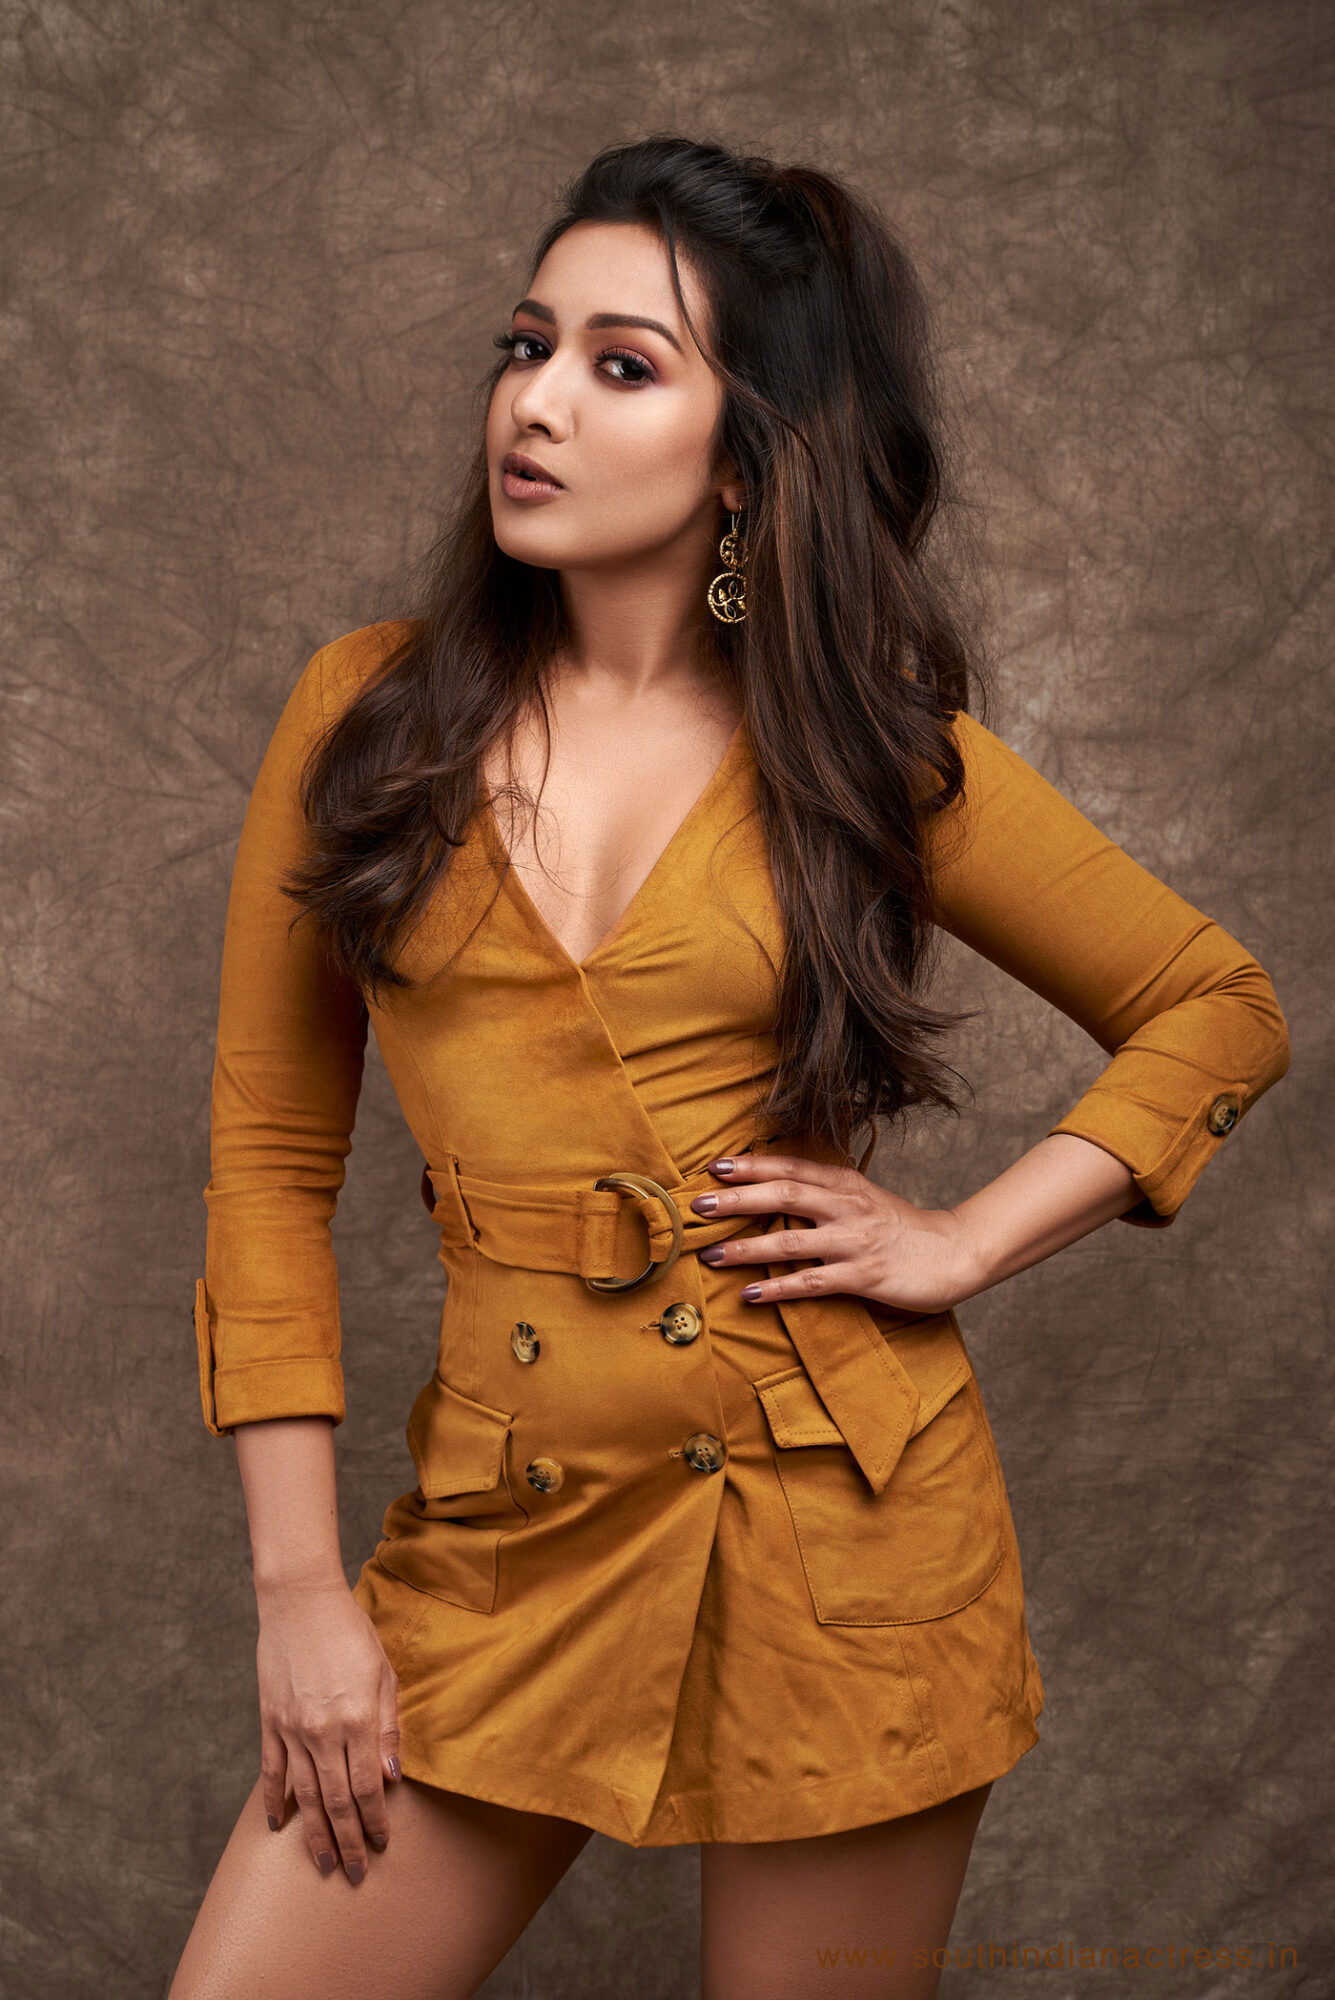 Catherine Tresa wearing Long Sleeve Plunge Buttoned Bodycon Dress